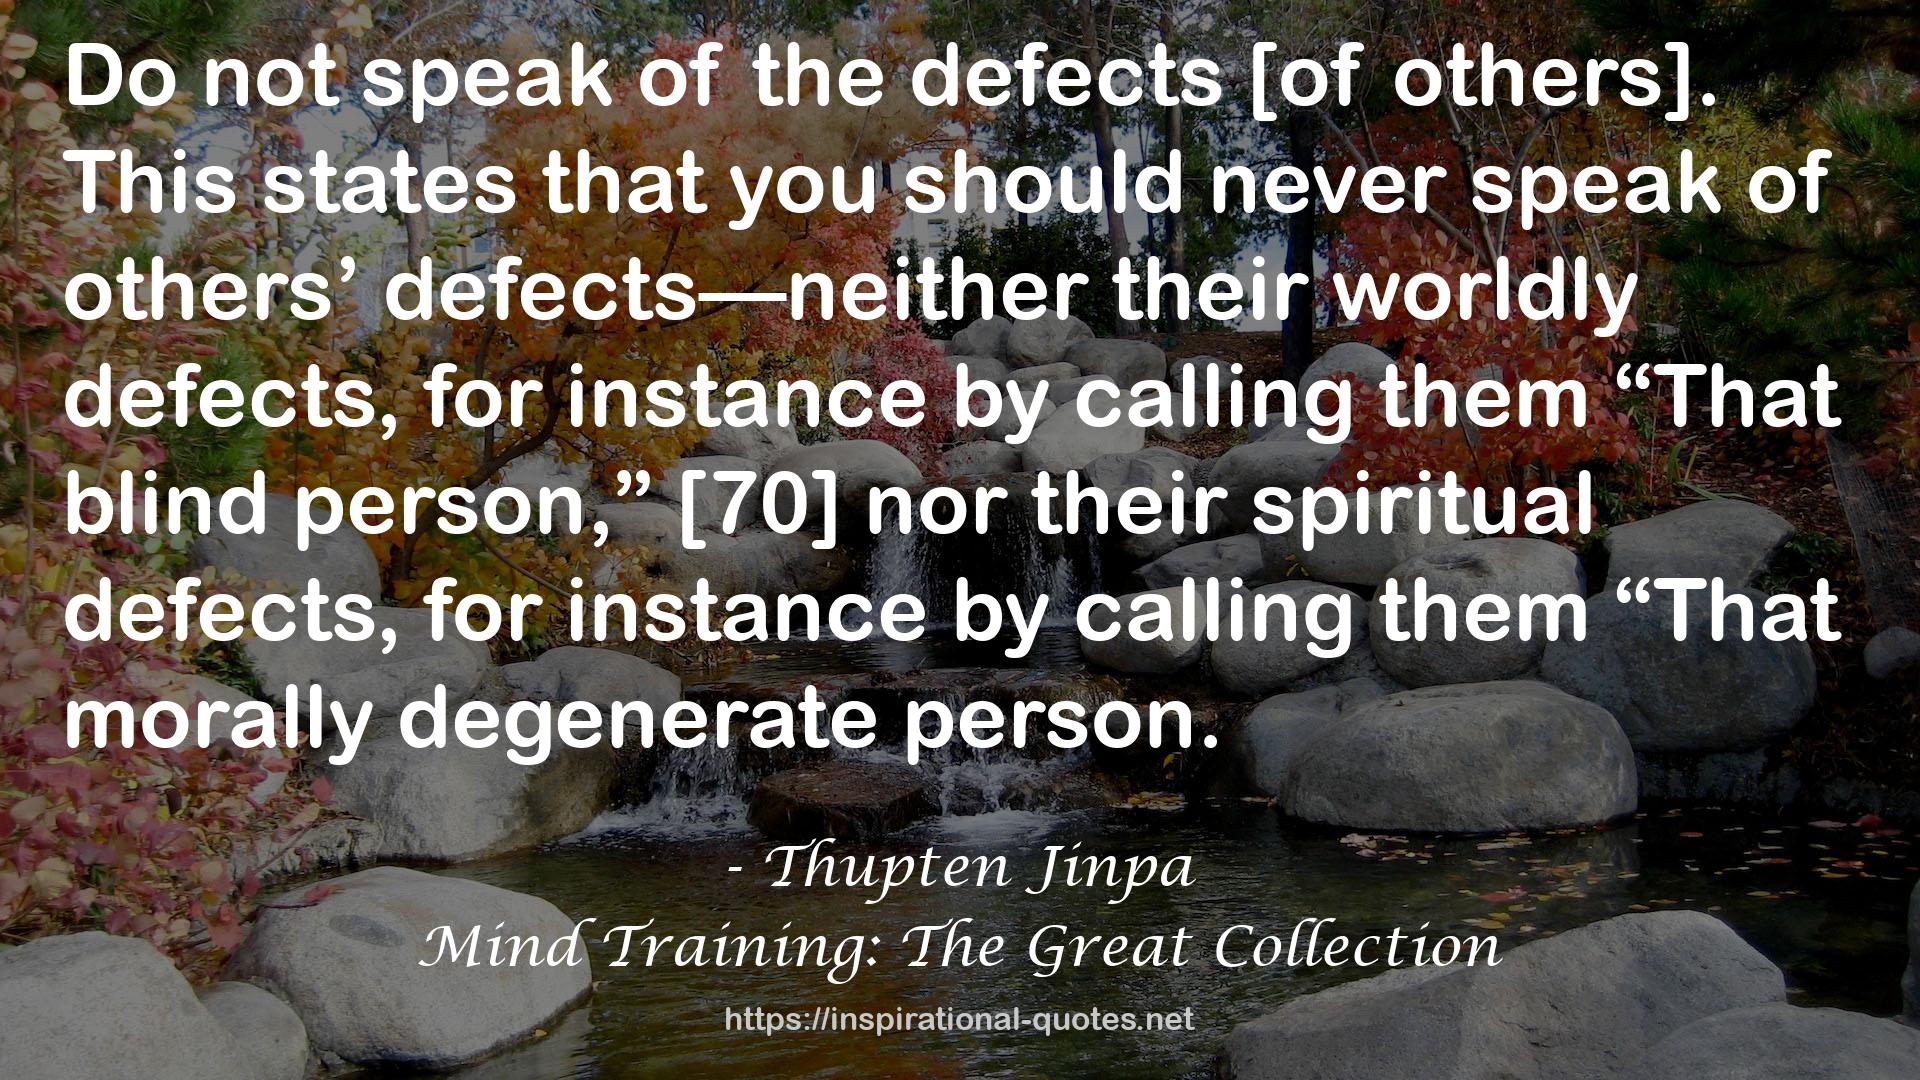 Mind Training: The Great Collection QUOTES